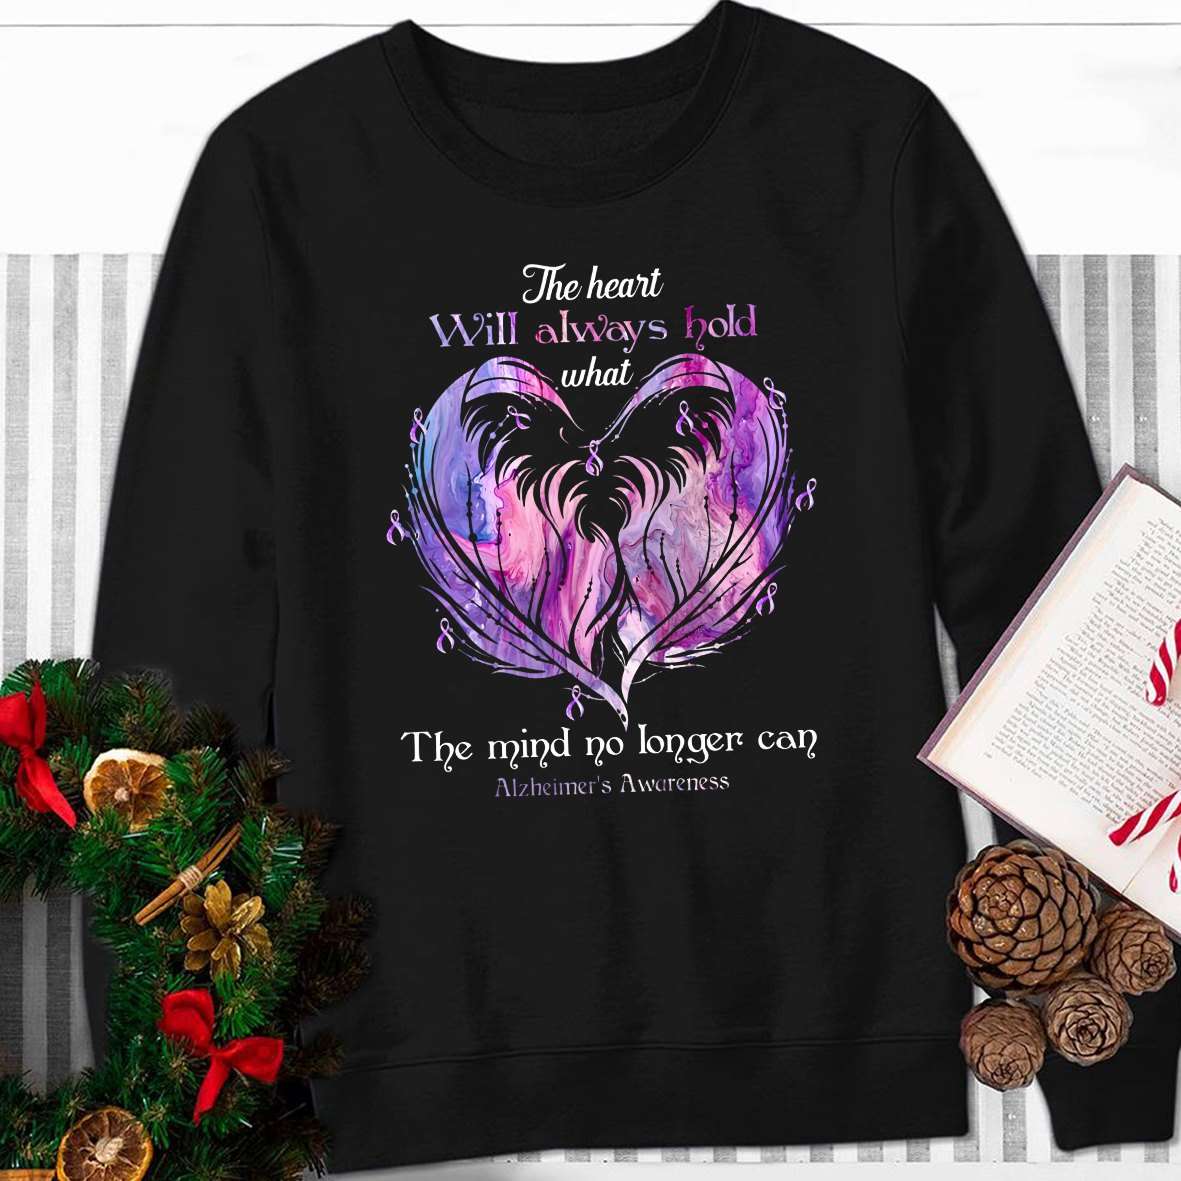 Feathers Heart Cancer Ribbon - The heart will always hold what the mond no longer can alzheimer's awareness